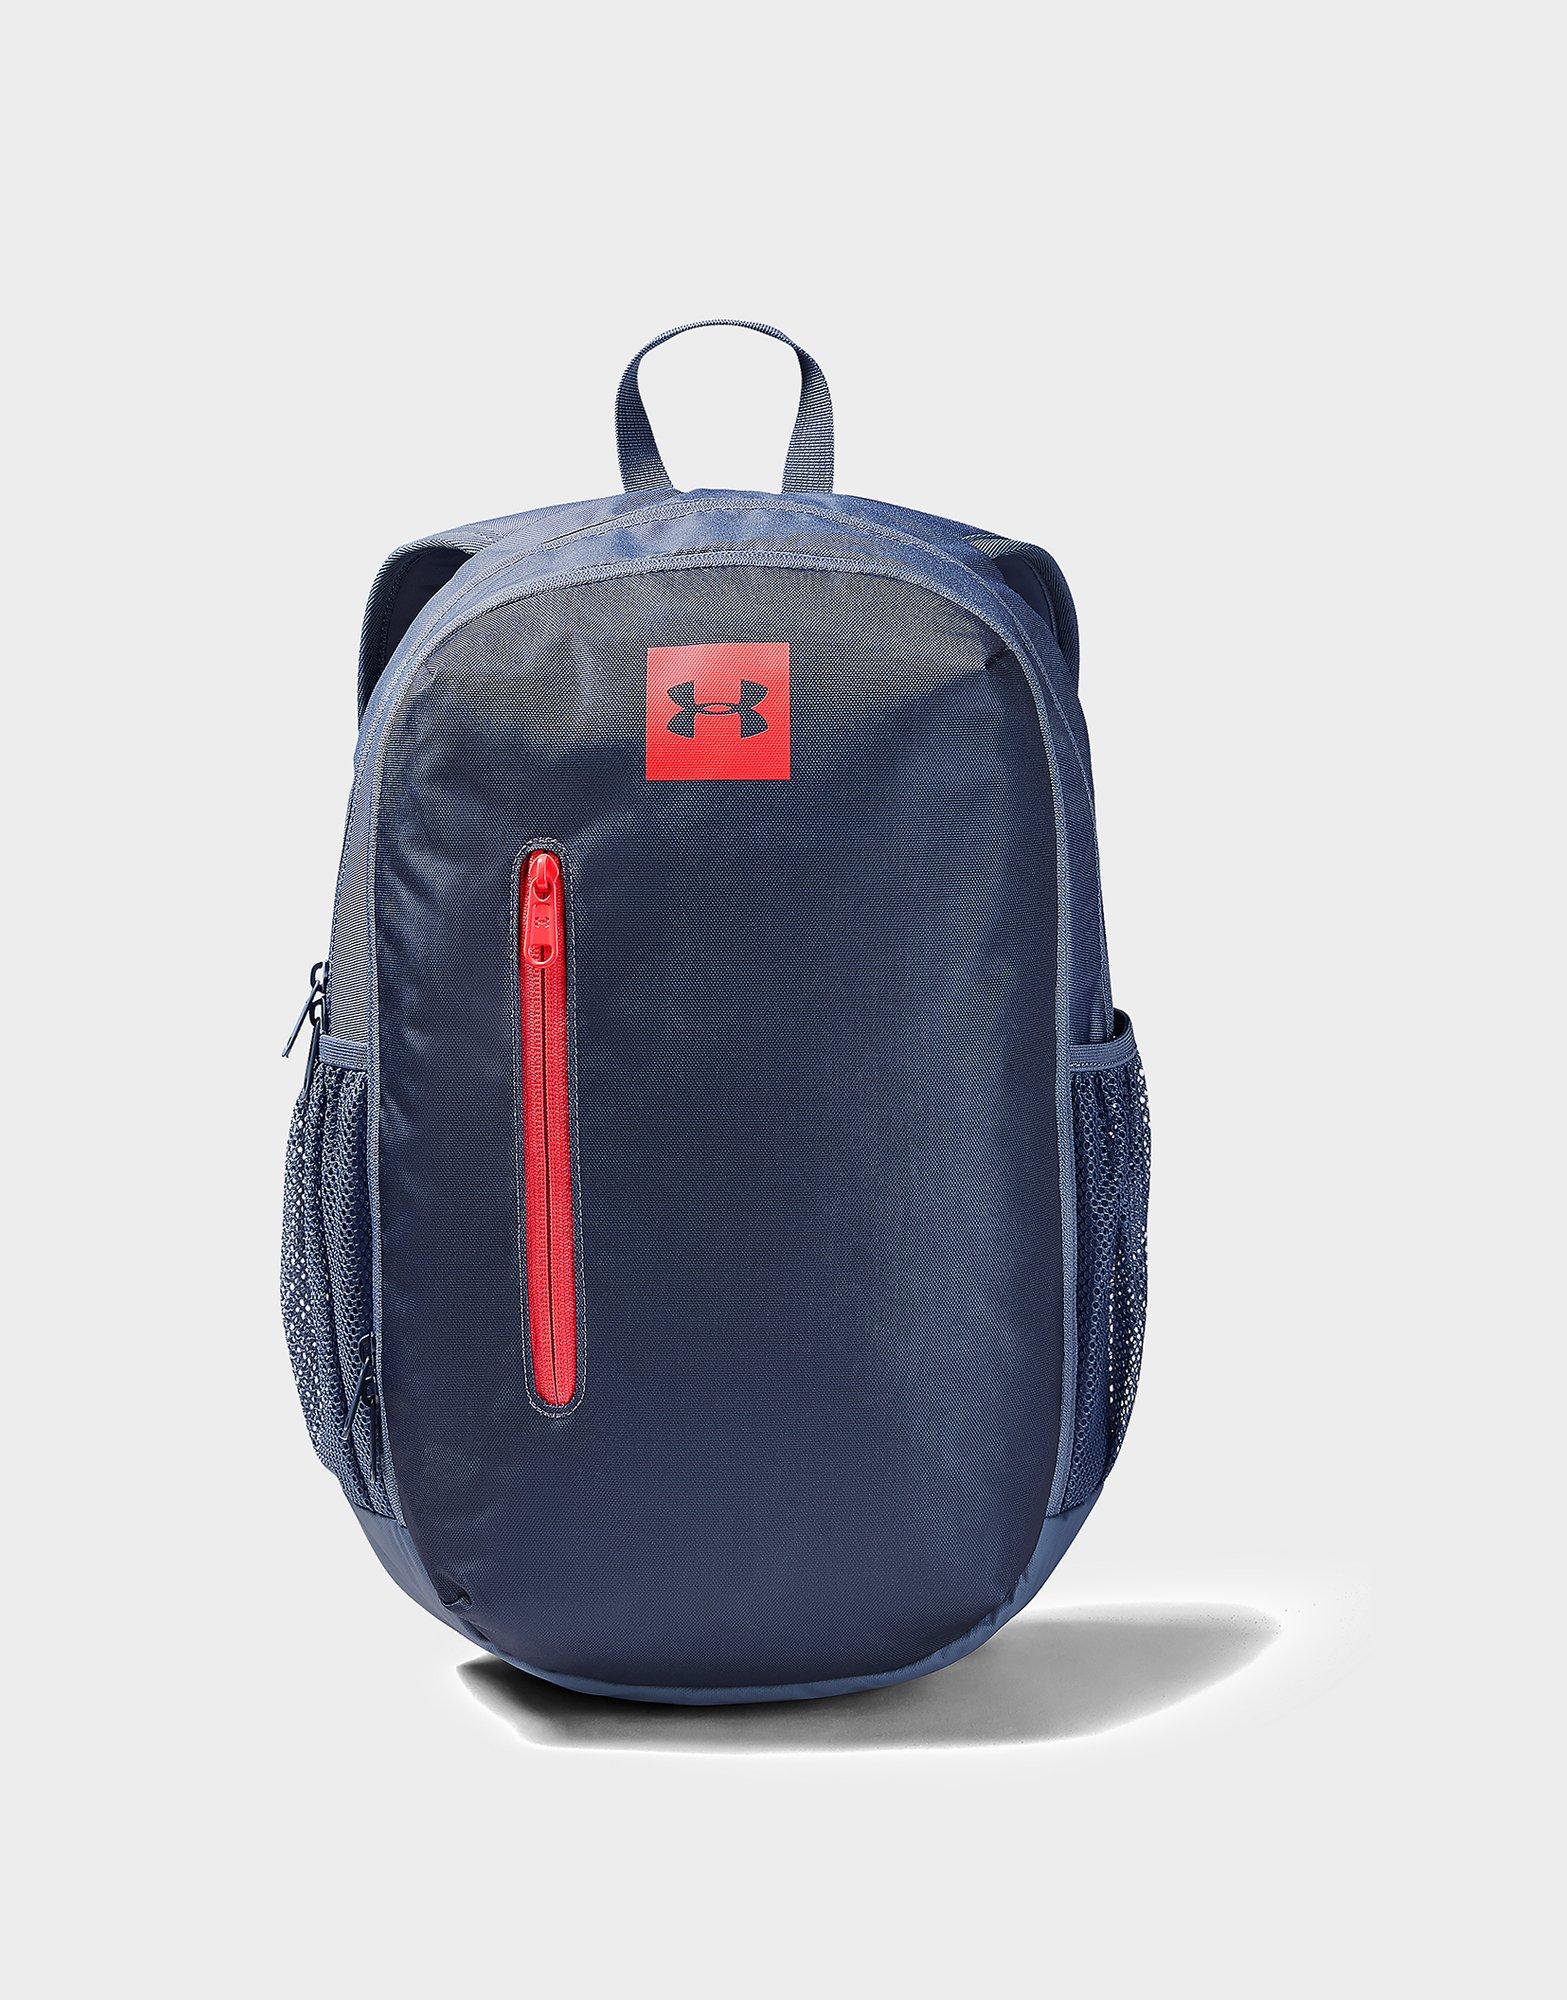 under armour roland backpack